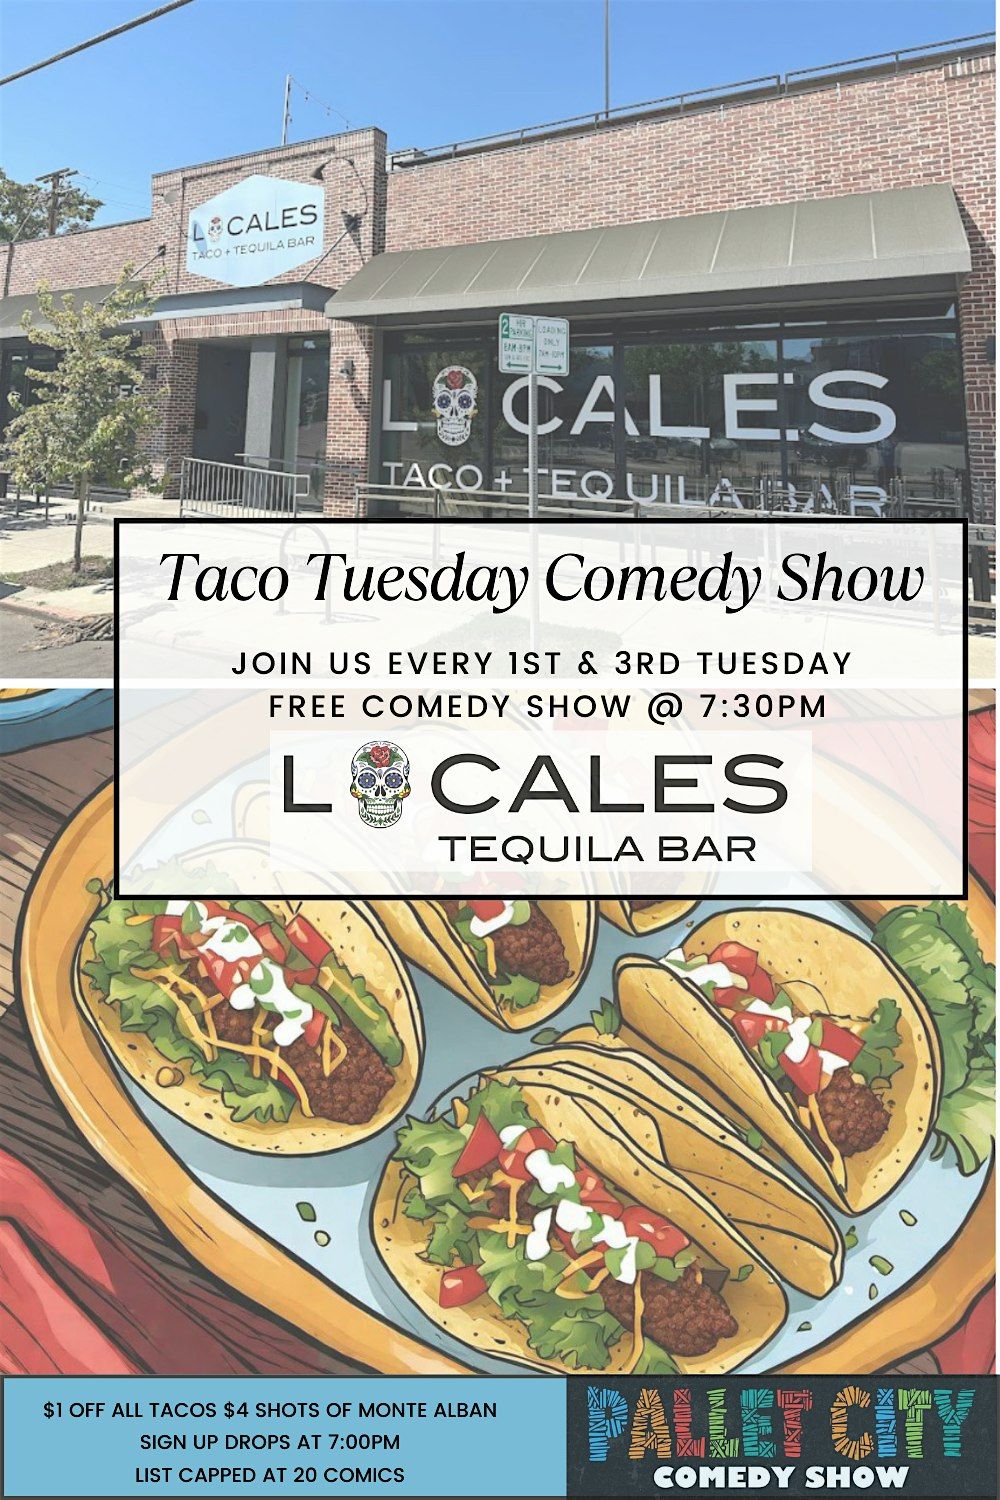 Taco Tuesday Comedy Show @ Locales Tequila Bar